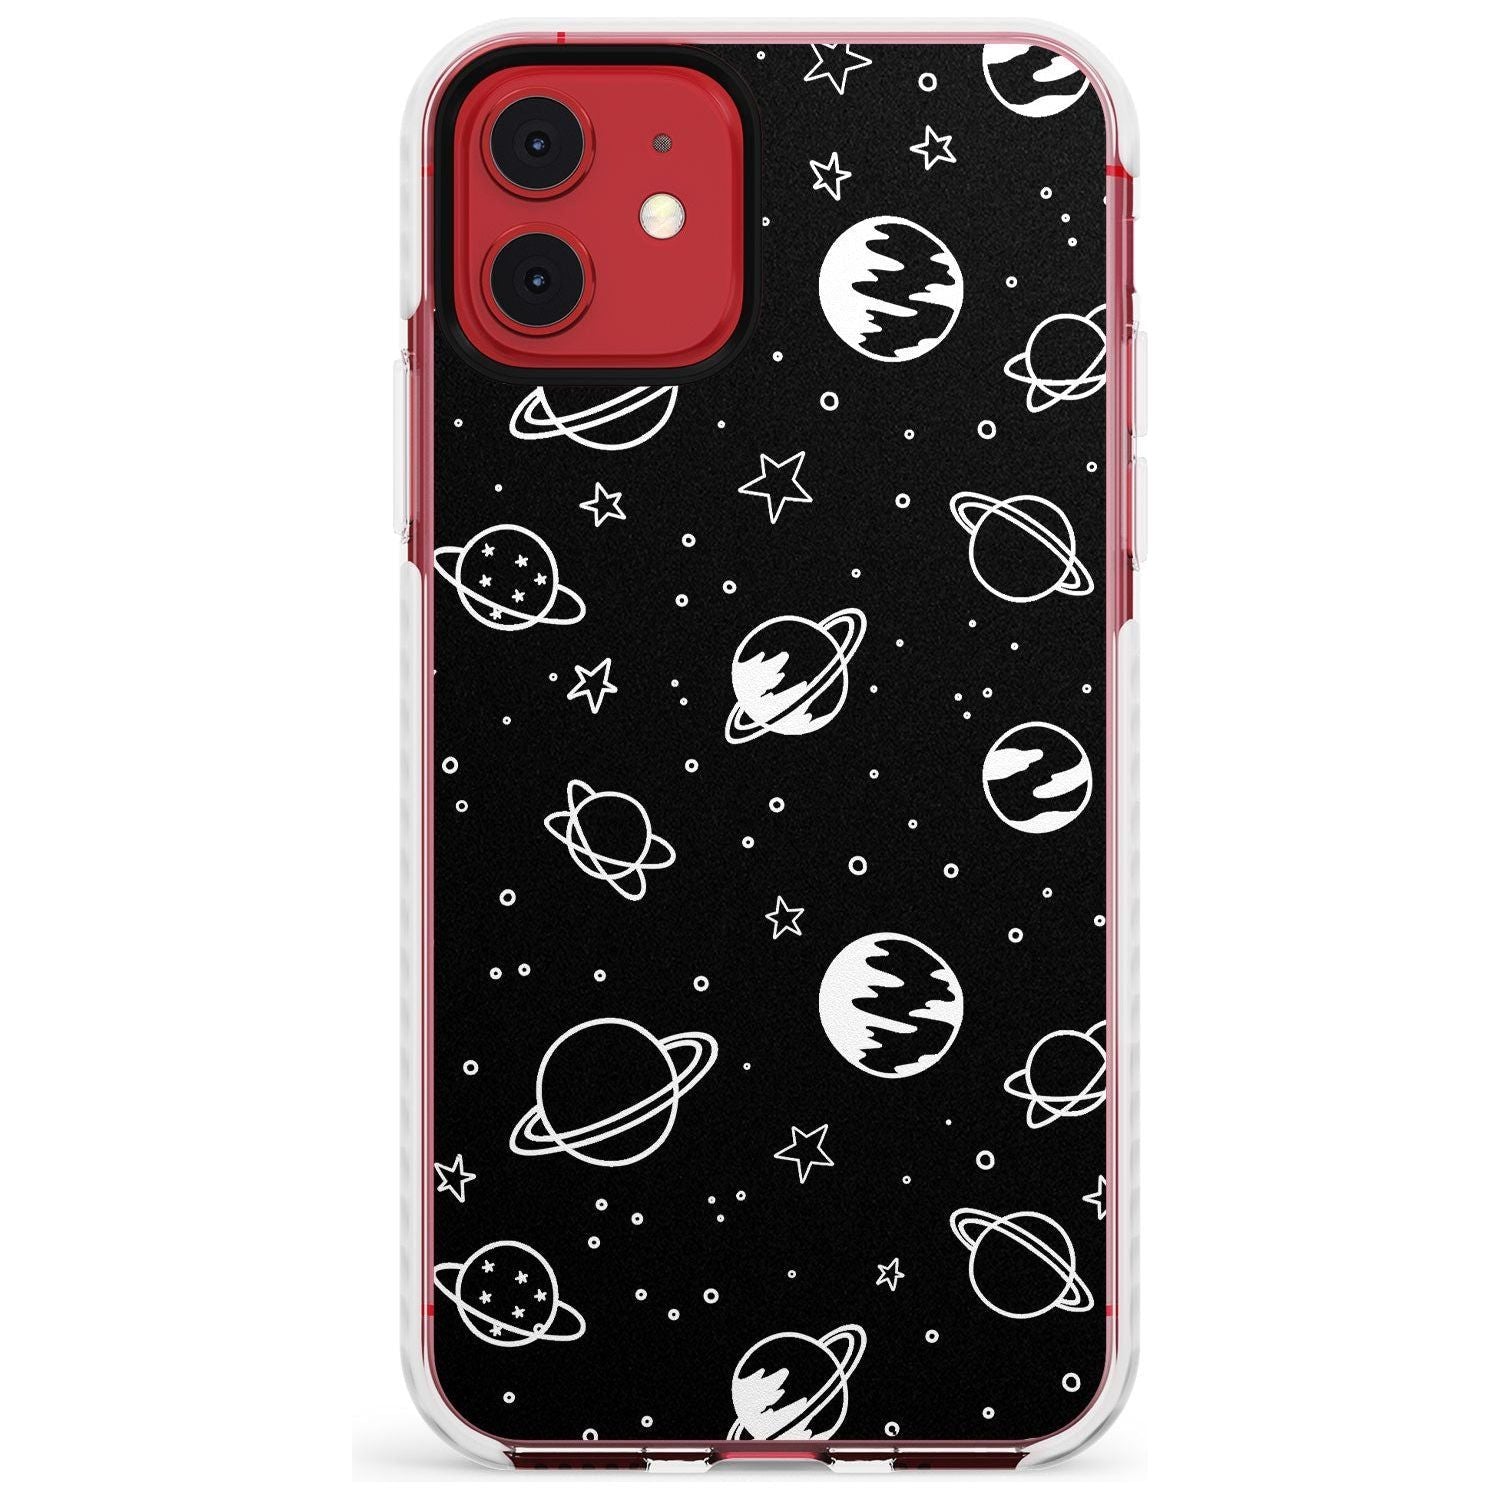 Outer Space Outlines: White on Black Slim TPU Phone Case for iPhone 11